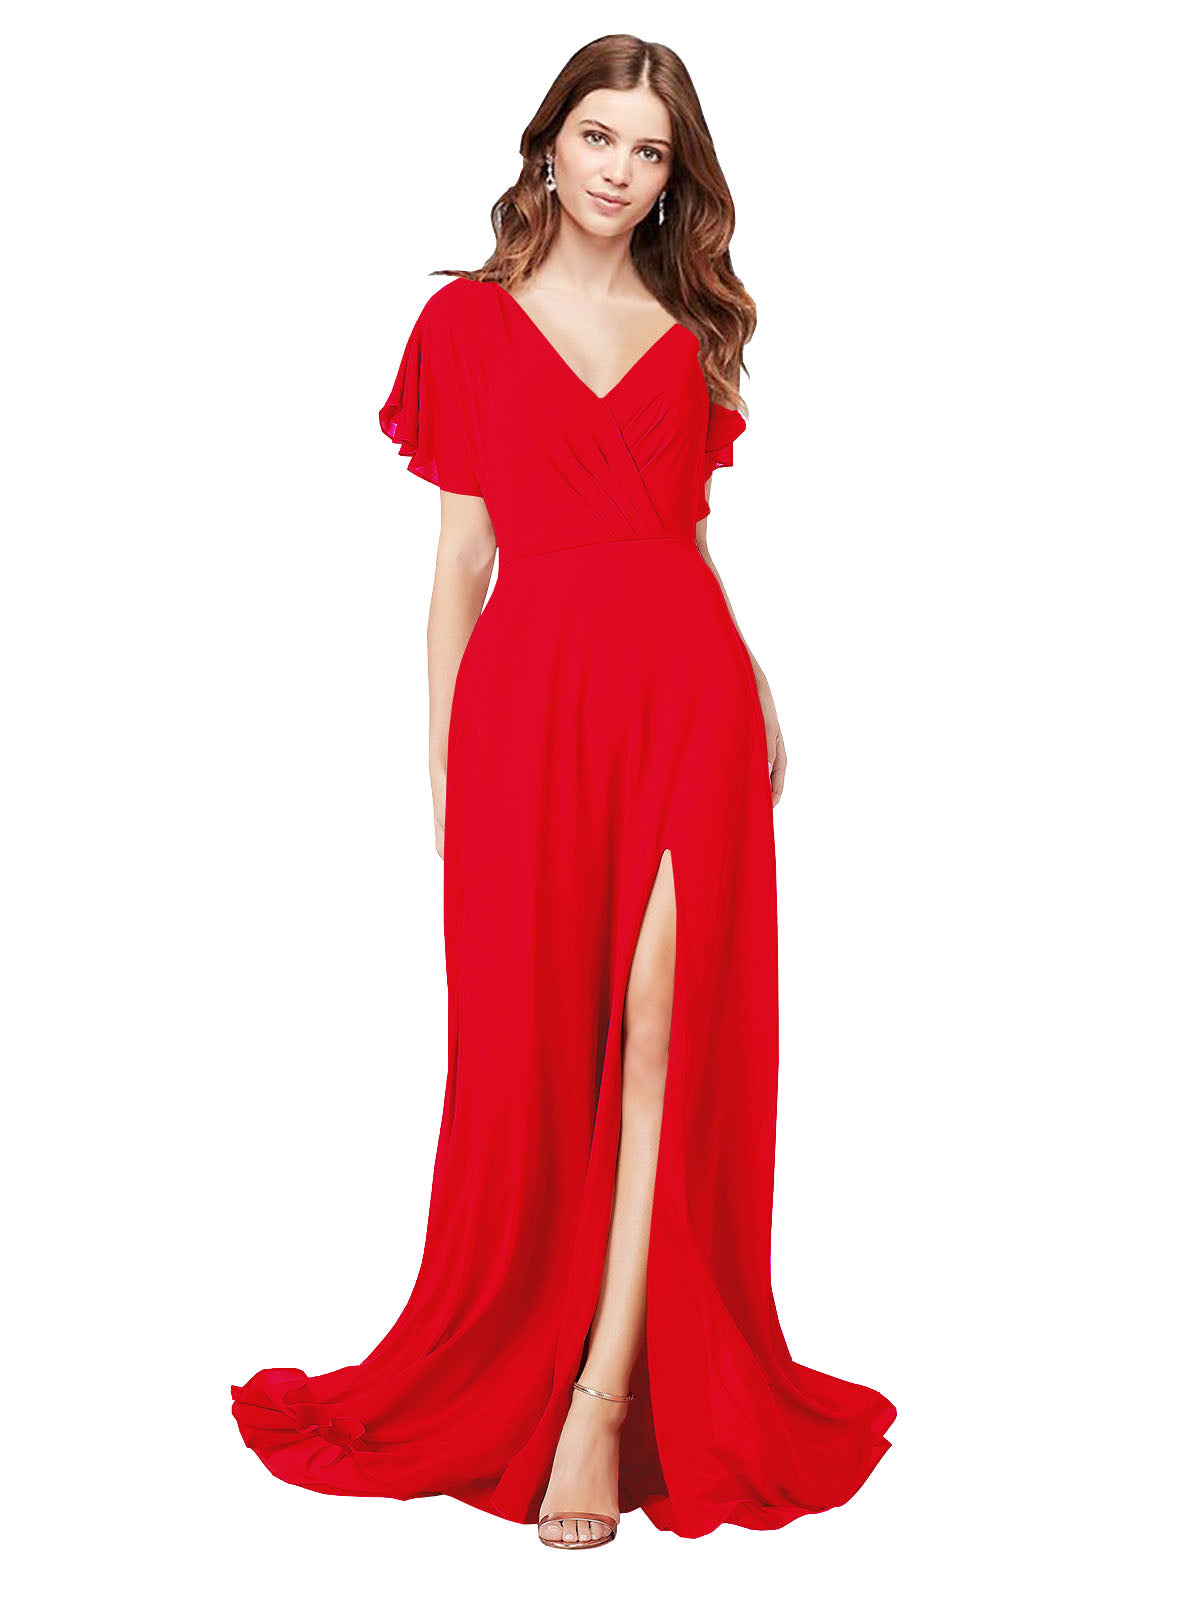 RightBrides Marisol Red A-Line V-Neck Cap Sleeves Long Bridesmaid Dress